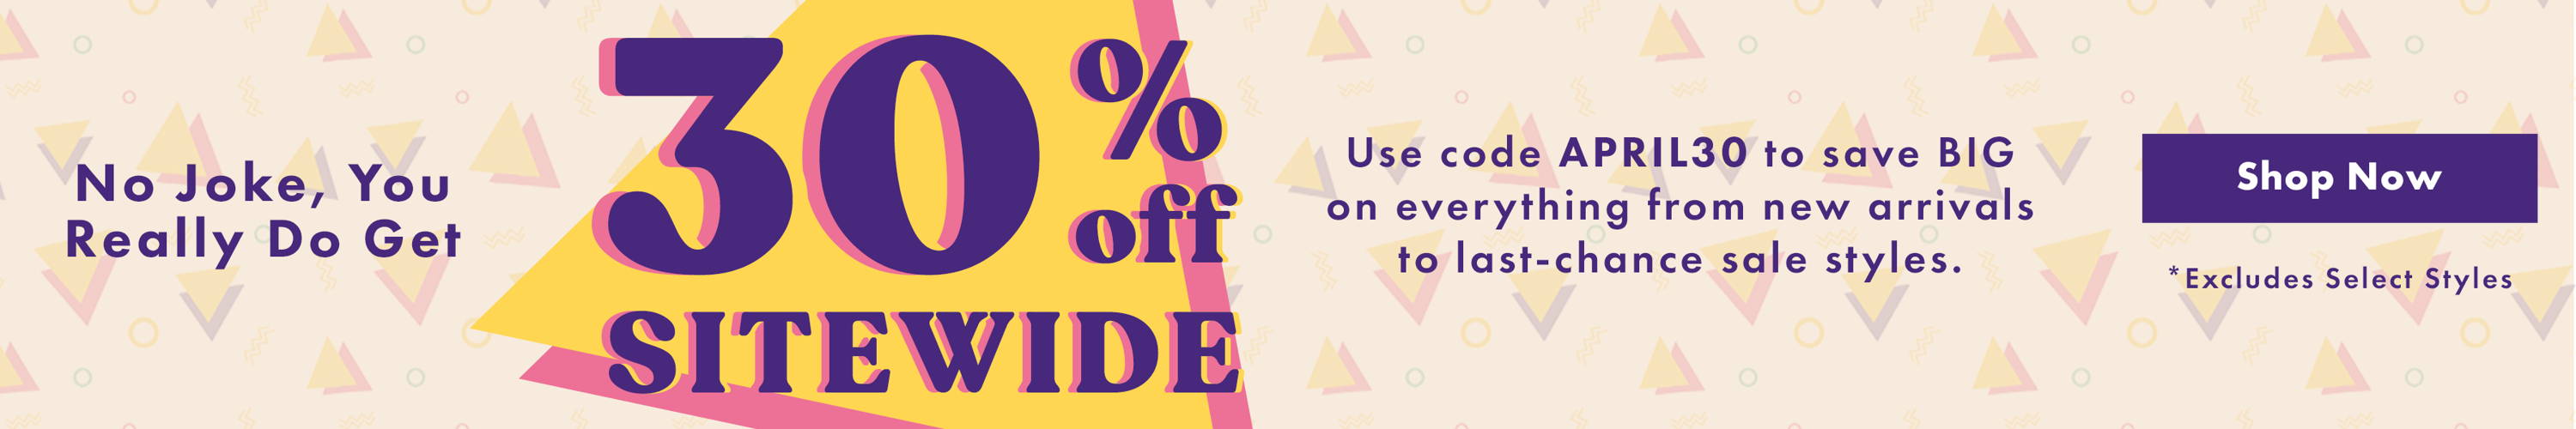 30% Off Sitewide - Use Code APRIL30 *Excludes Select Styles